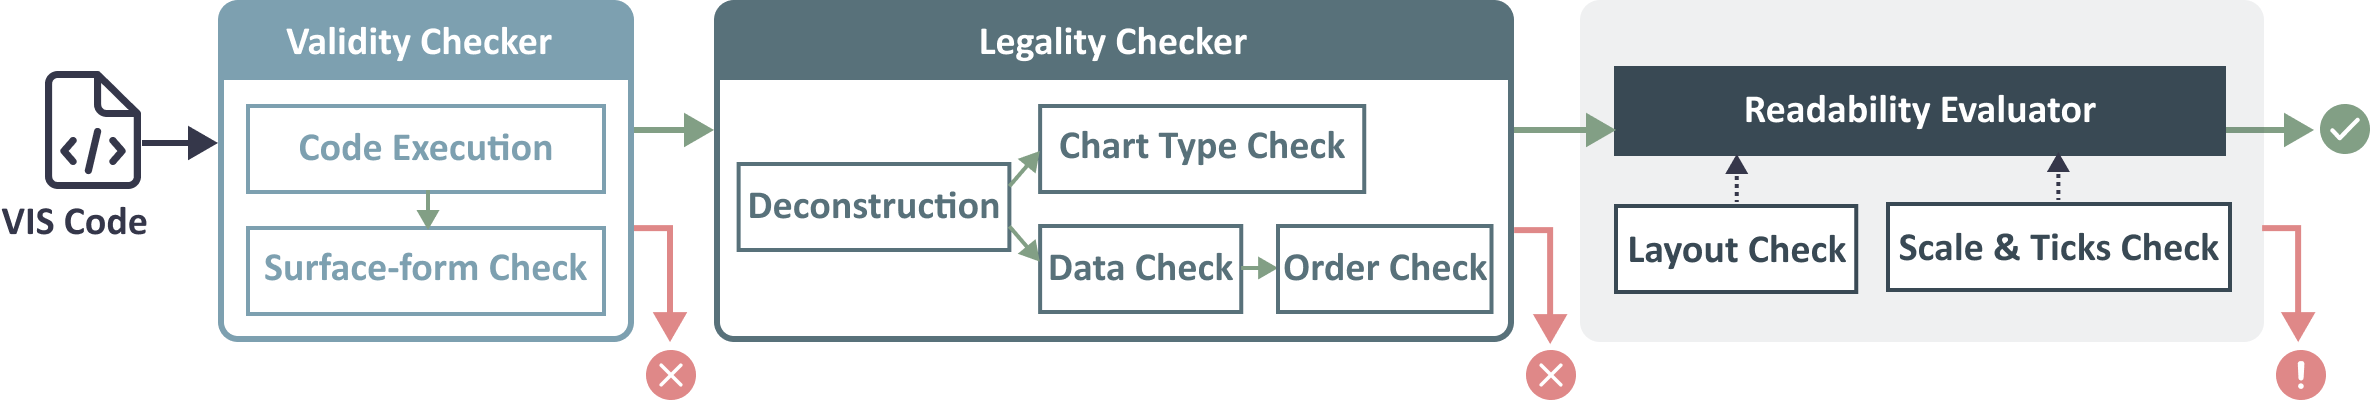 The pipeline of VisEval includes three key modules: the validity checker, the legality checker, and the readability evaluator.